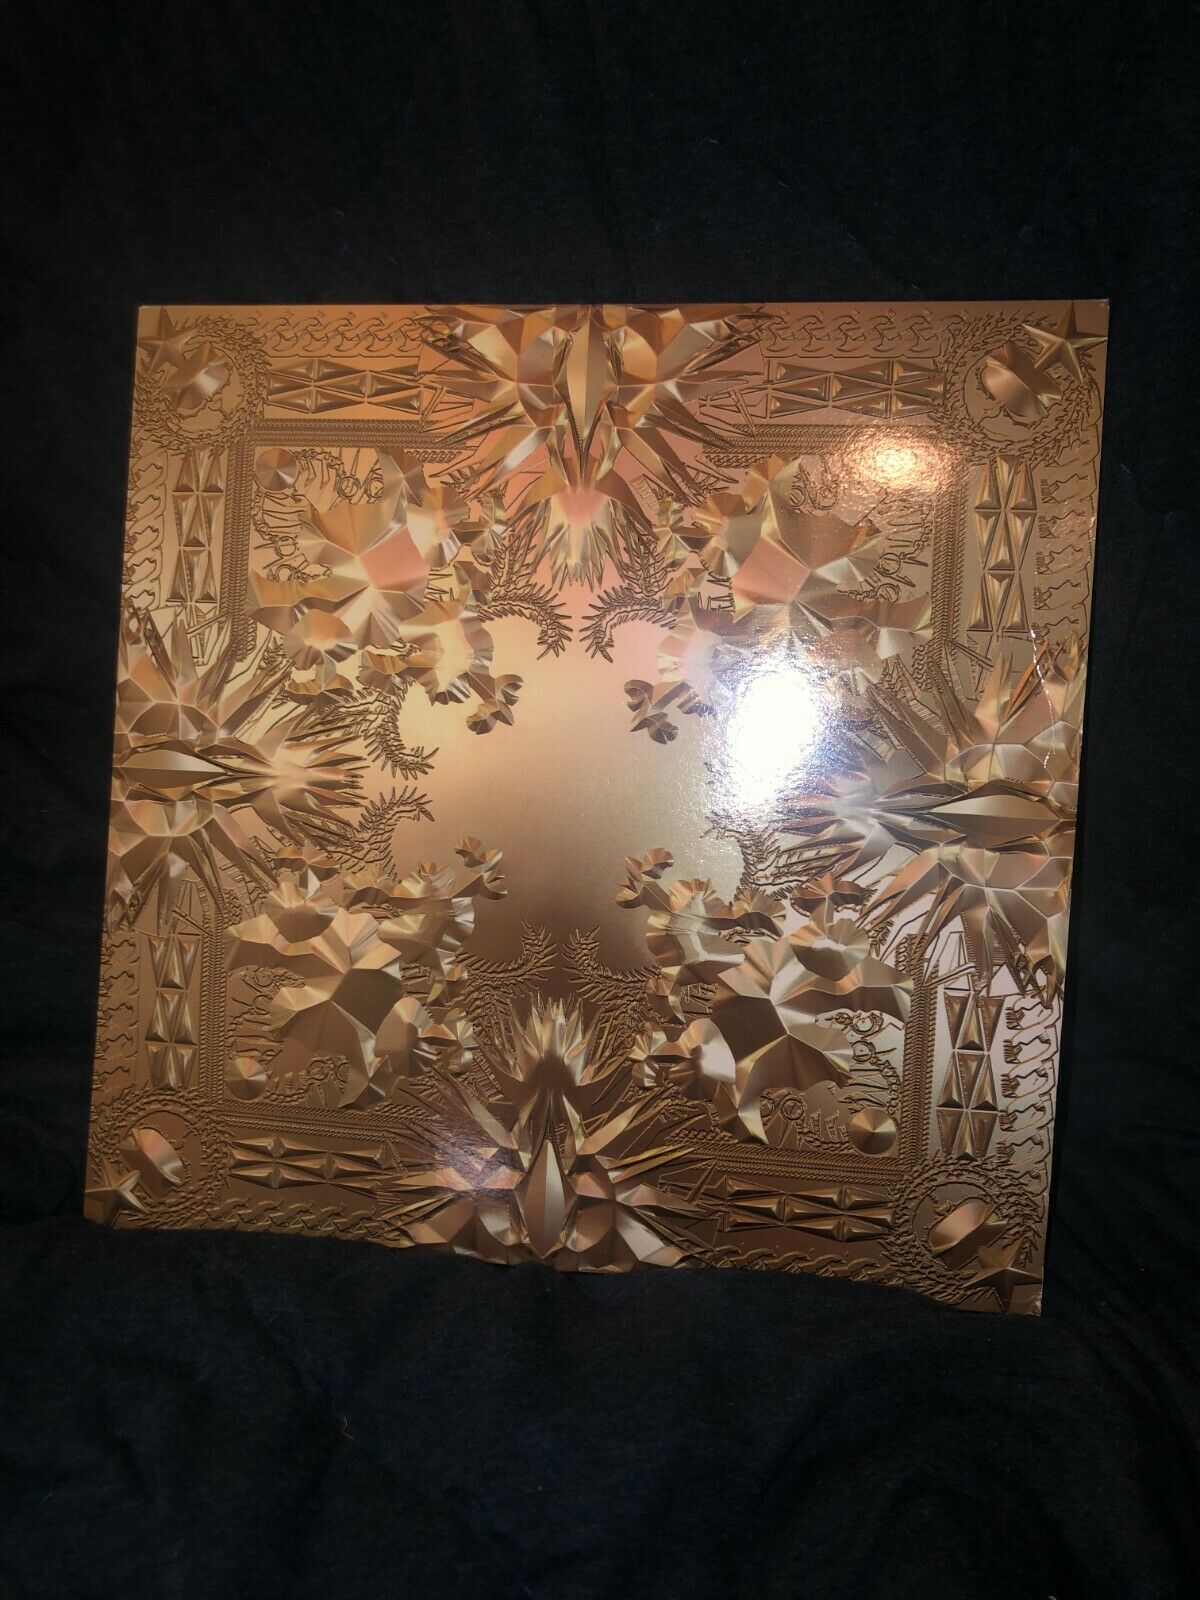 popsike.com - Watch the Throne by Jay-Z & Kanye West VINYL Record - auction  details